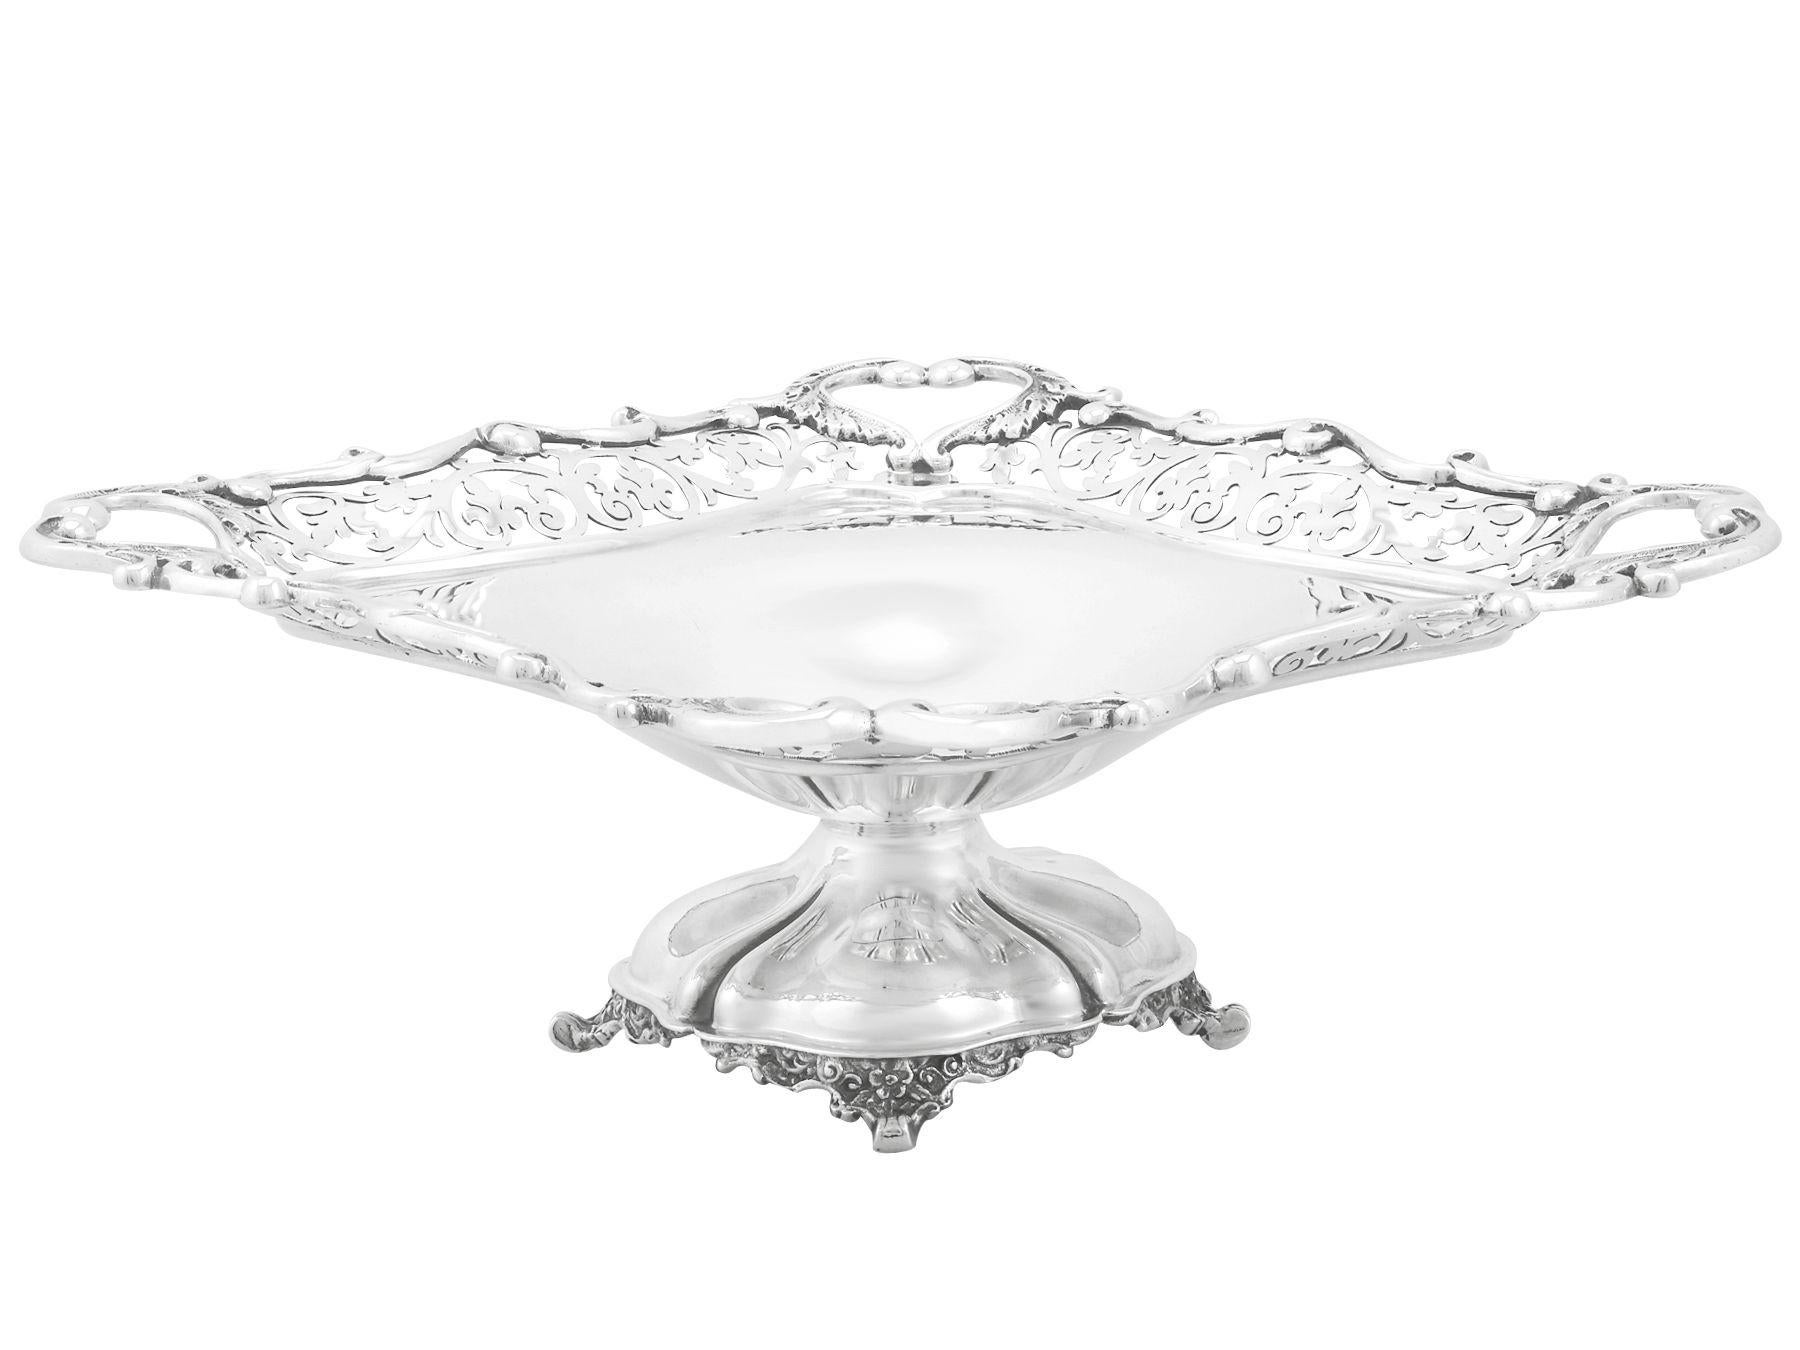 An exceptional, fine and impressive antique Edwardian English sterling silver dish; an addition to our ornamental silverware collection.

This exceptional antique Edwardian sterling silver dish has a square shaped rounded plain form onto a domed